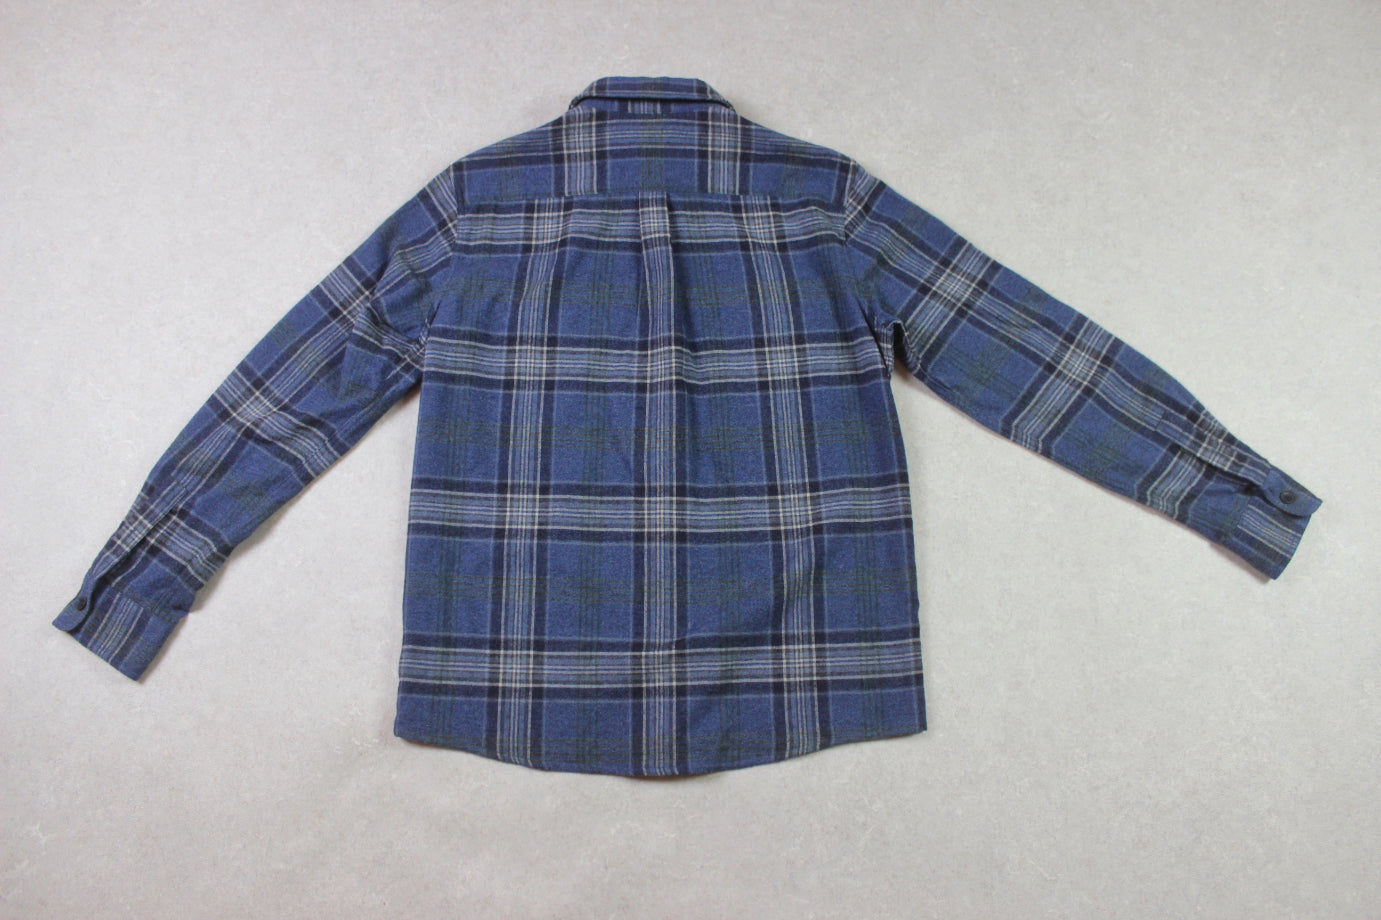 A.P.C. - Flannel Shirt - Blue Check - Small